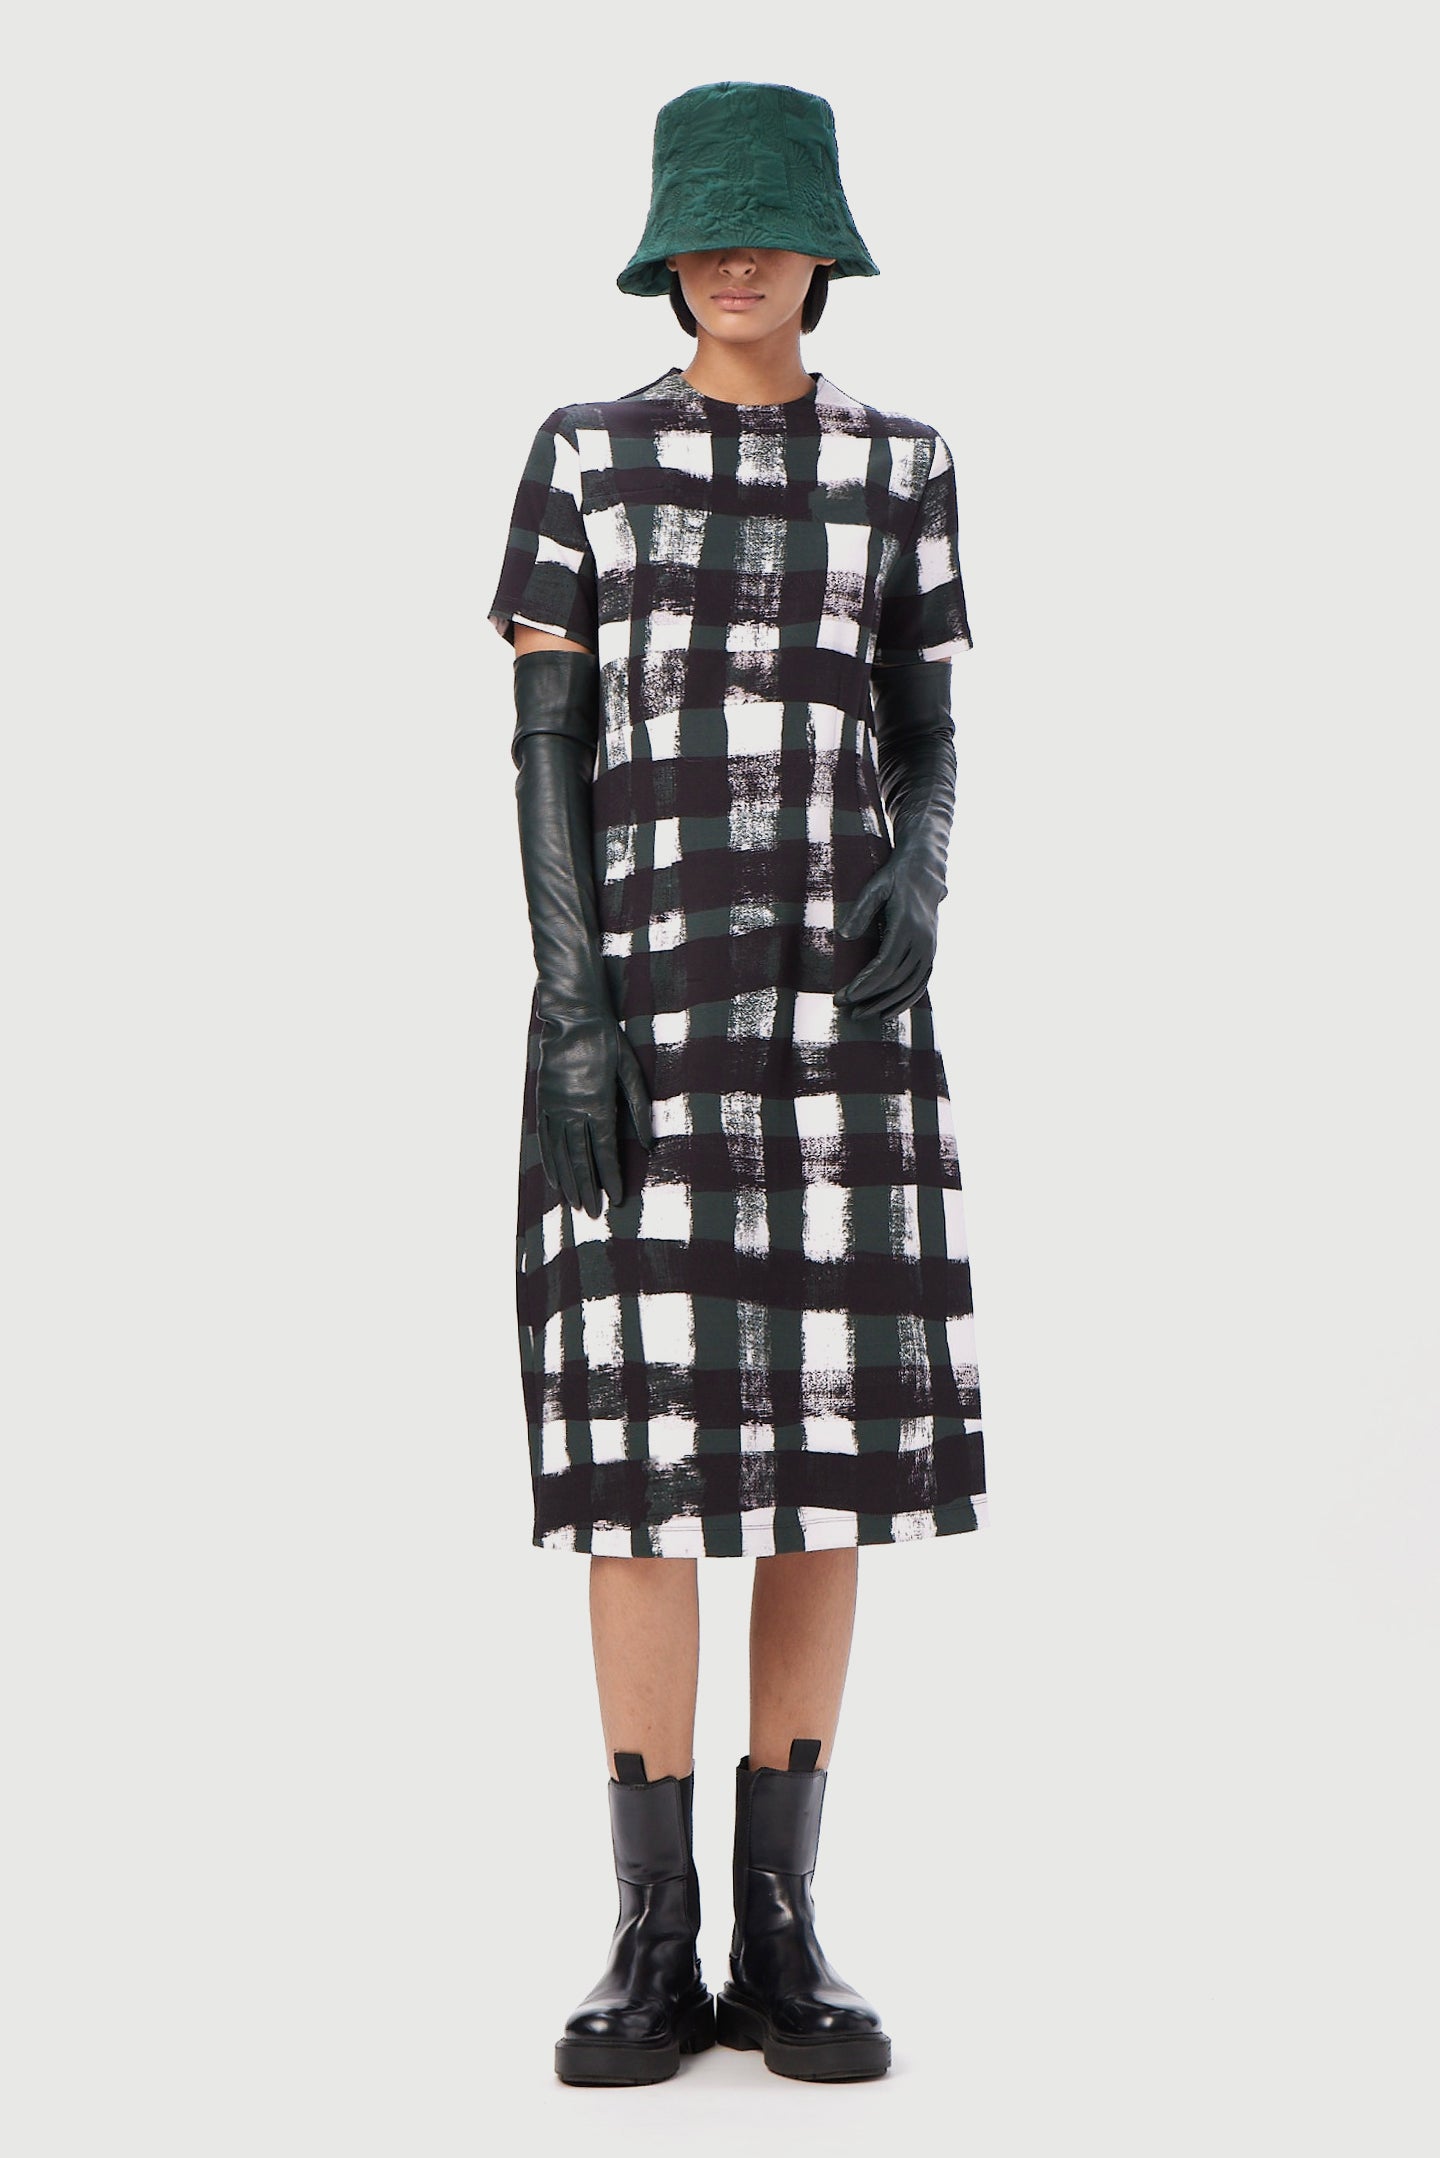 Slim Fit Round Neck Dress with All-Over Large Checks Print